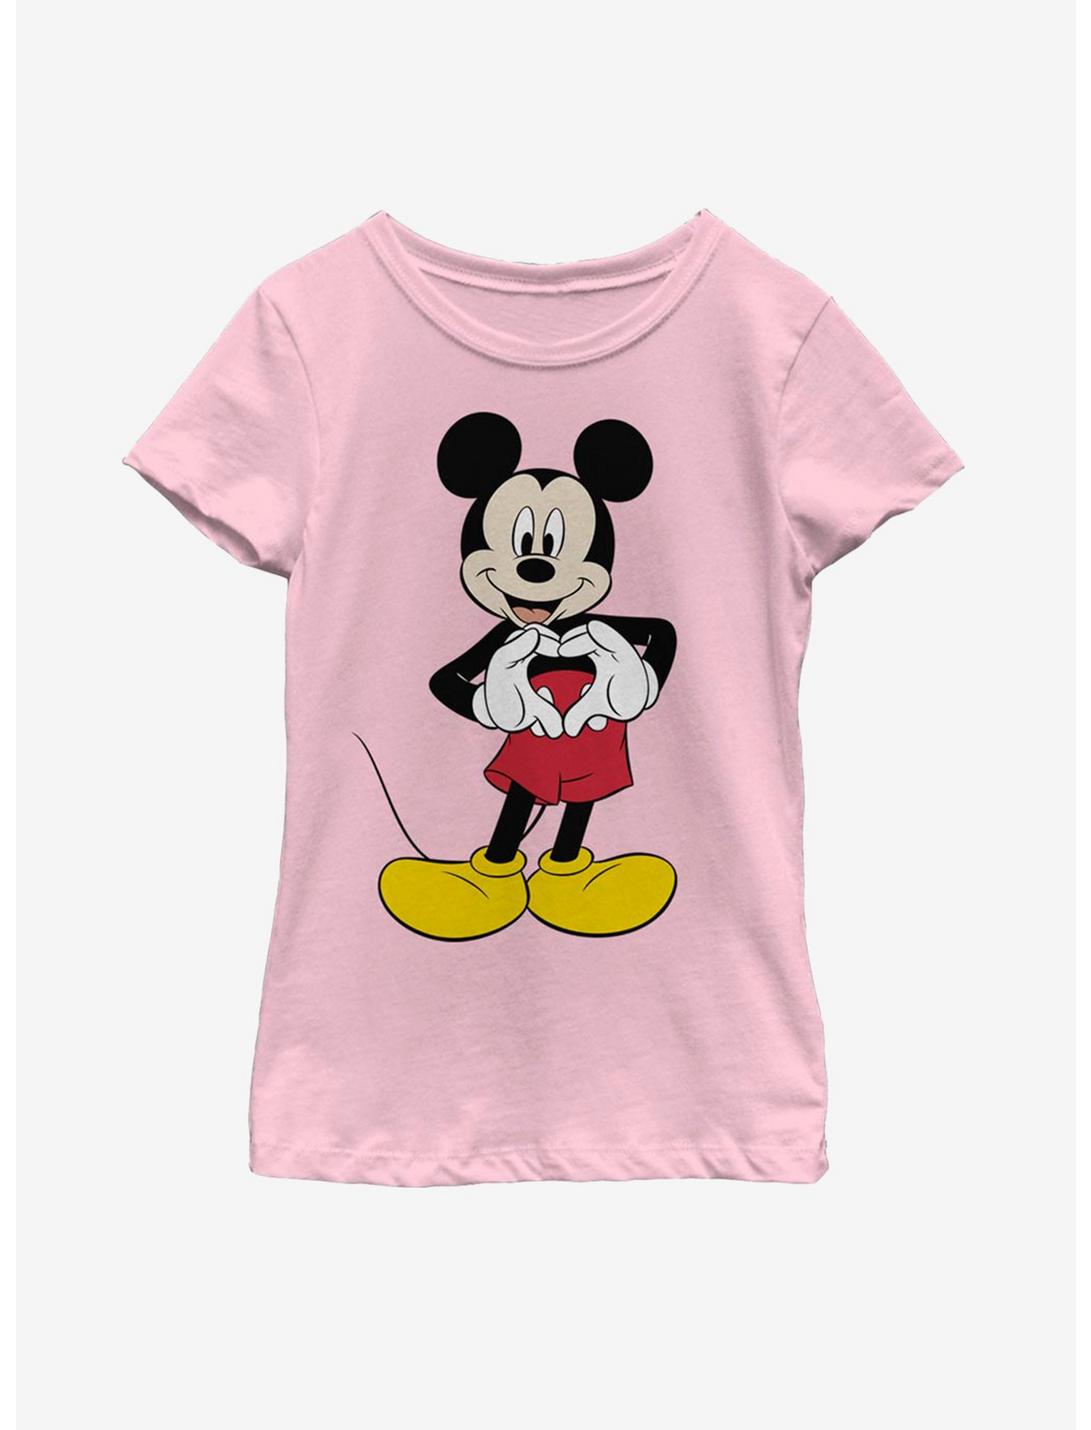 Disney Mickey Mouse Love Youth Girls T-Shirt, PINK, hi-res